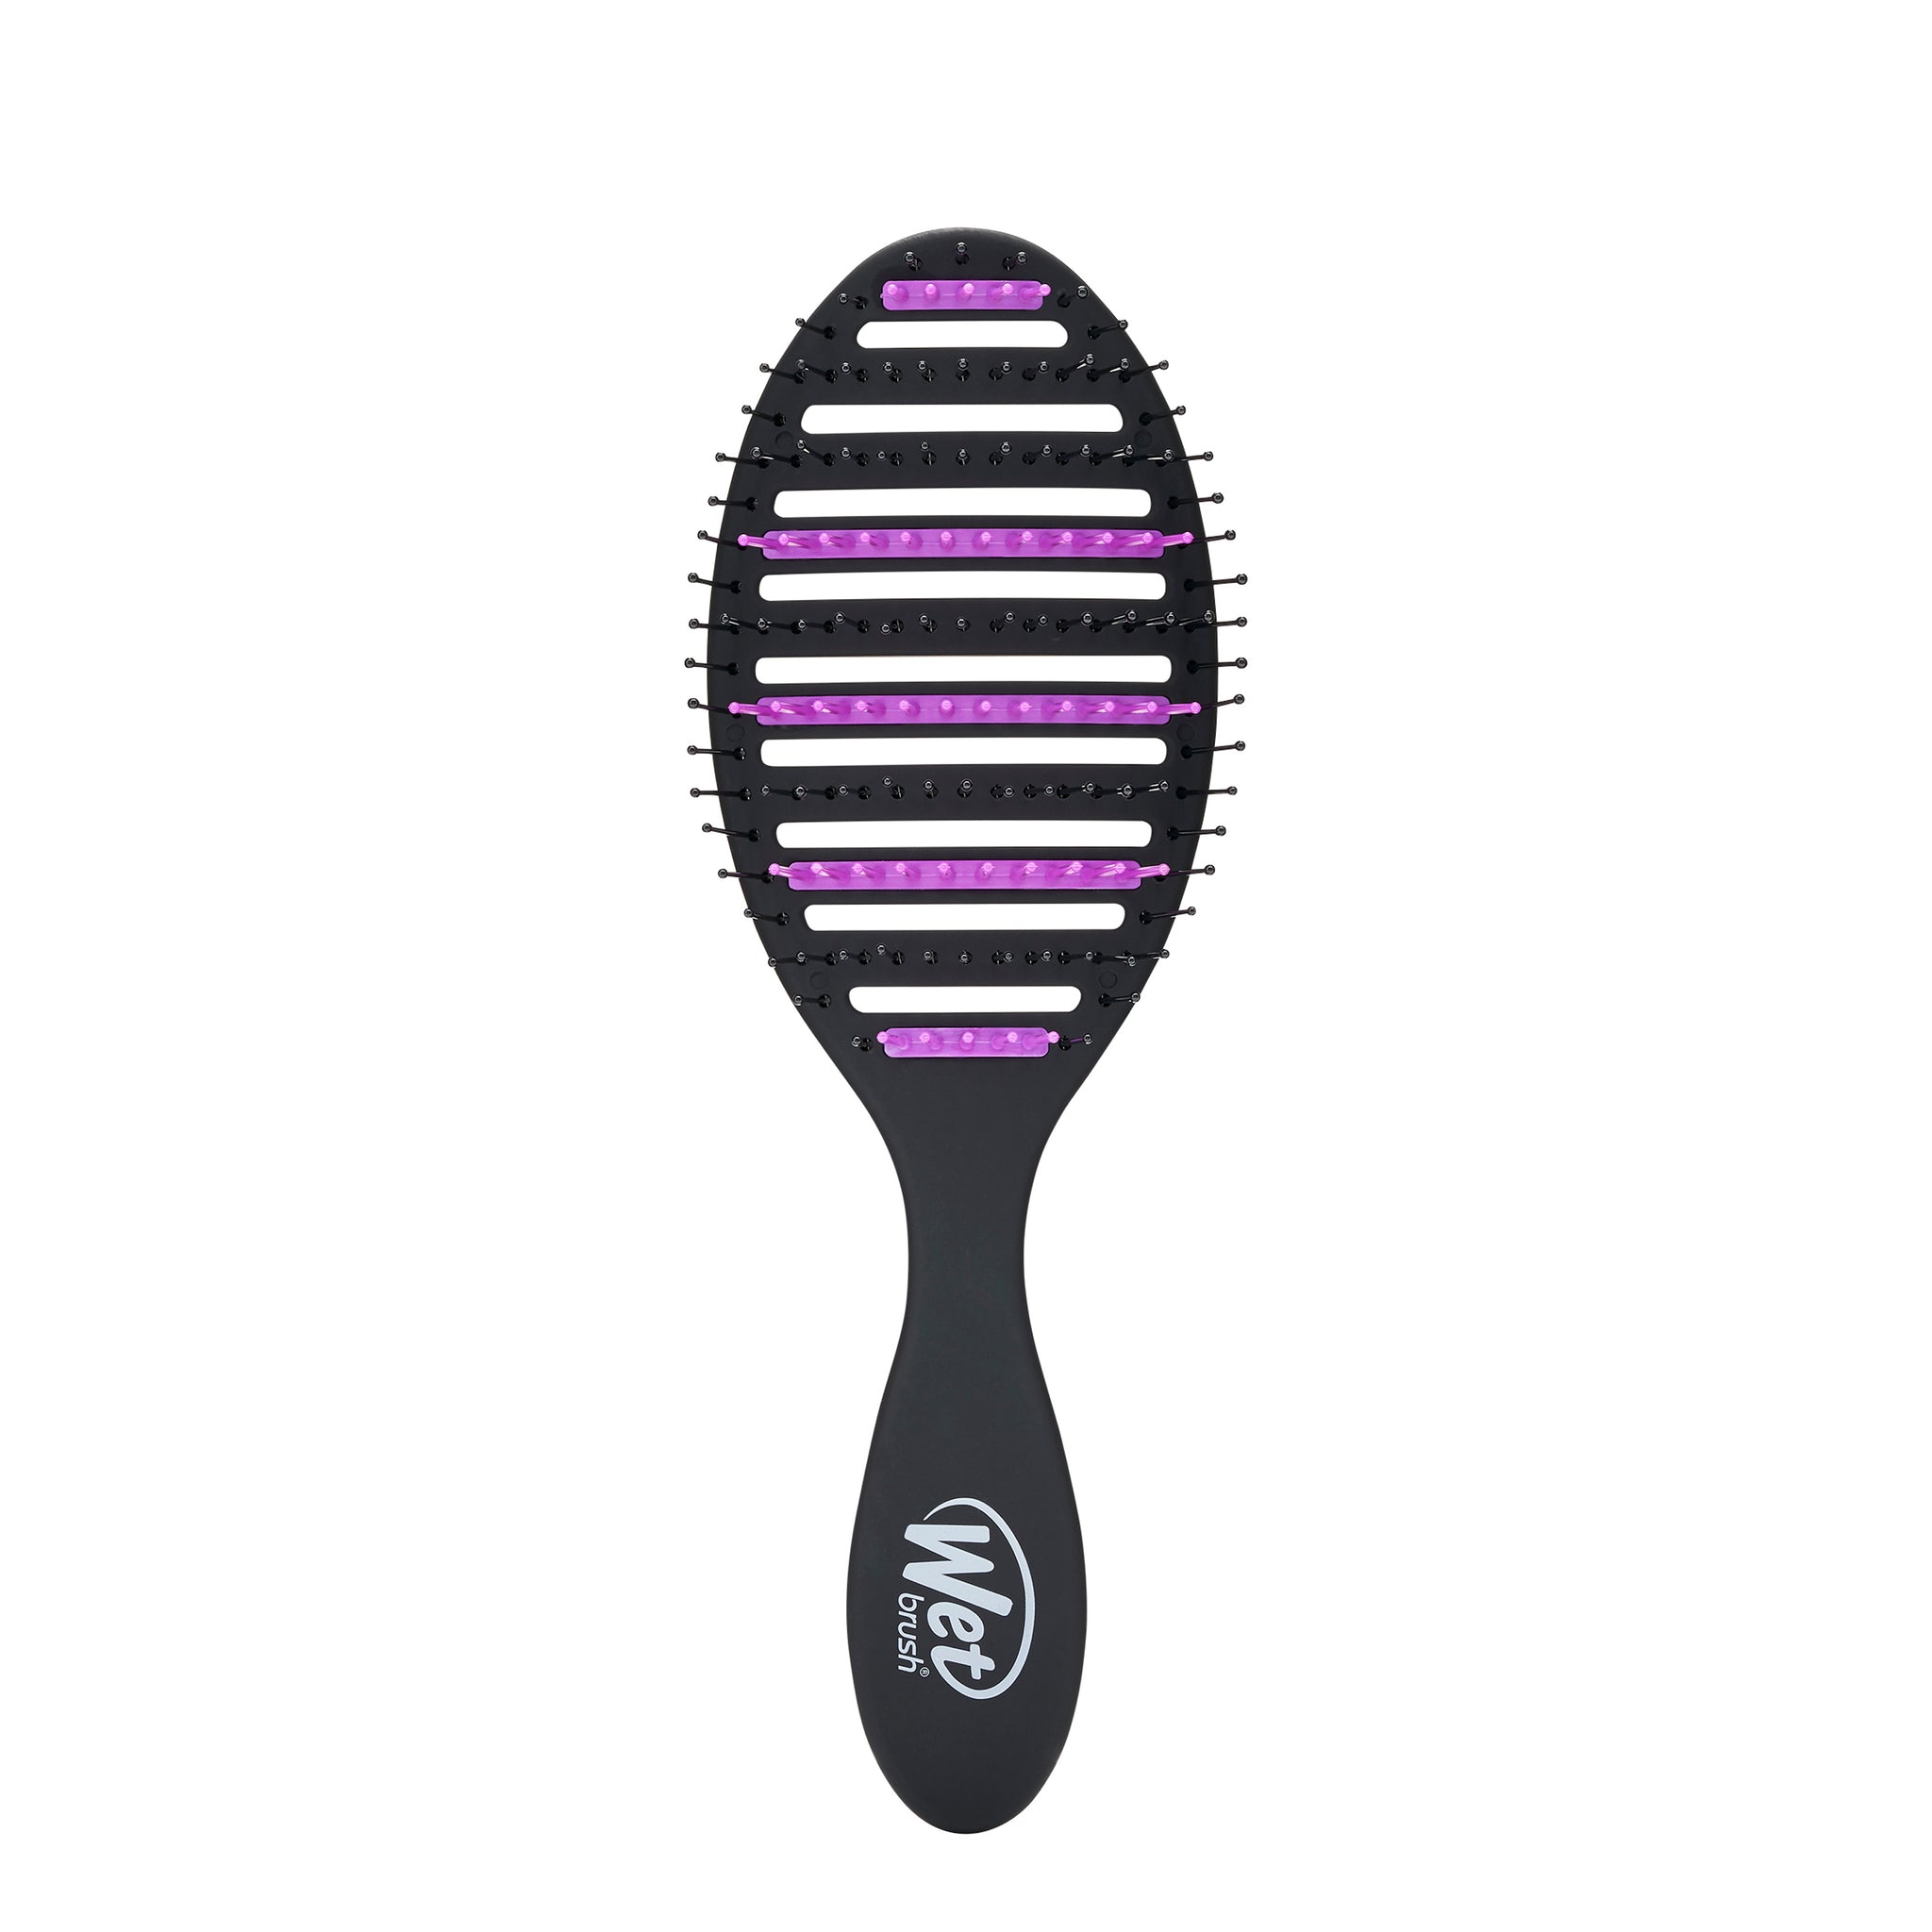     CHARCOALINFUSED-Oval-MULTI-HairBrush